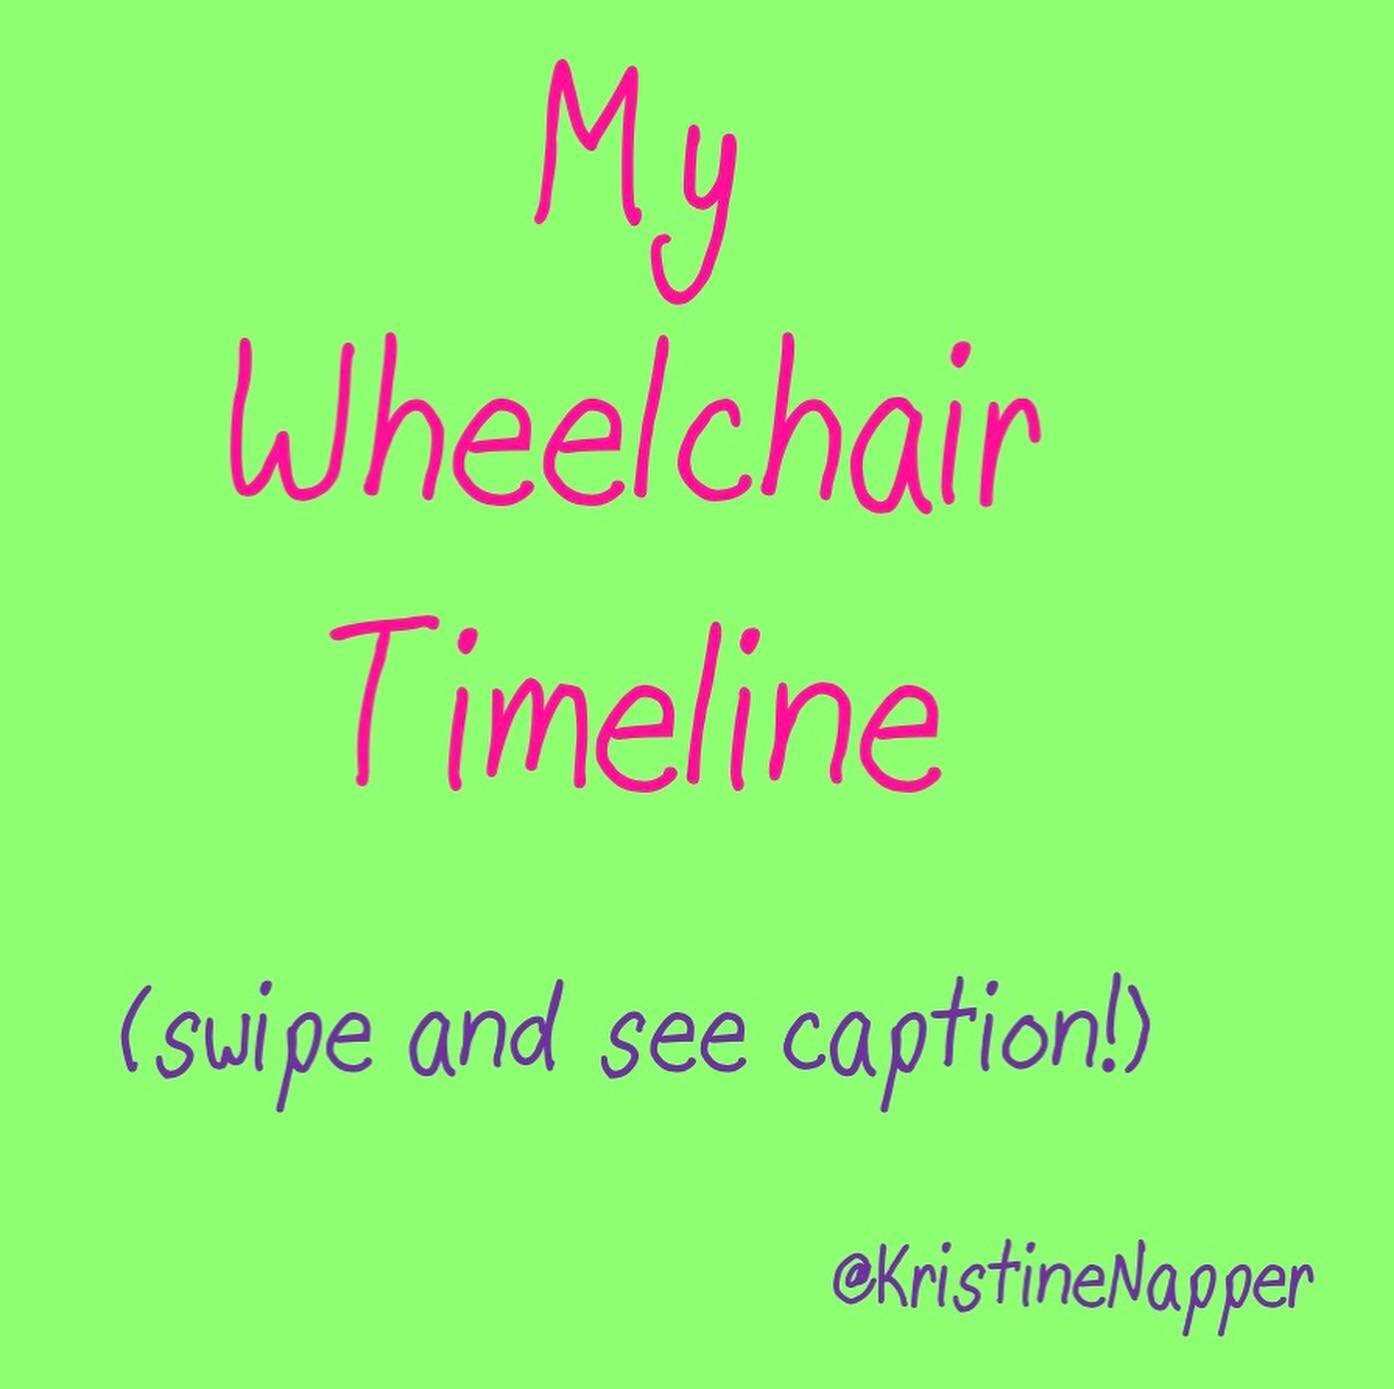 @woley&rsquo;s daughter had another great question: &ldquo;How old were you when you got your wheelchair?&rdquo; I&rsquo;ve actually had several wheelchairs in my life! So I thought I&rsquo;d put together this little timeline. :)
.
SWIPE!
.
I started